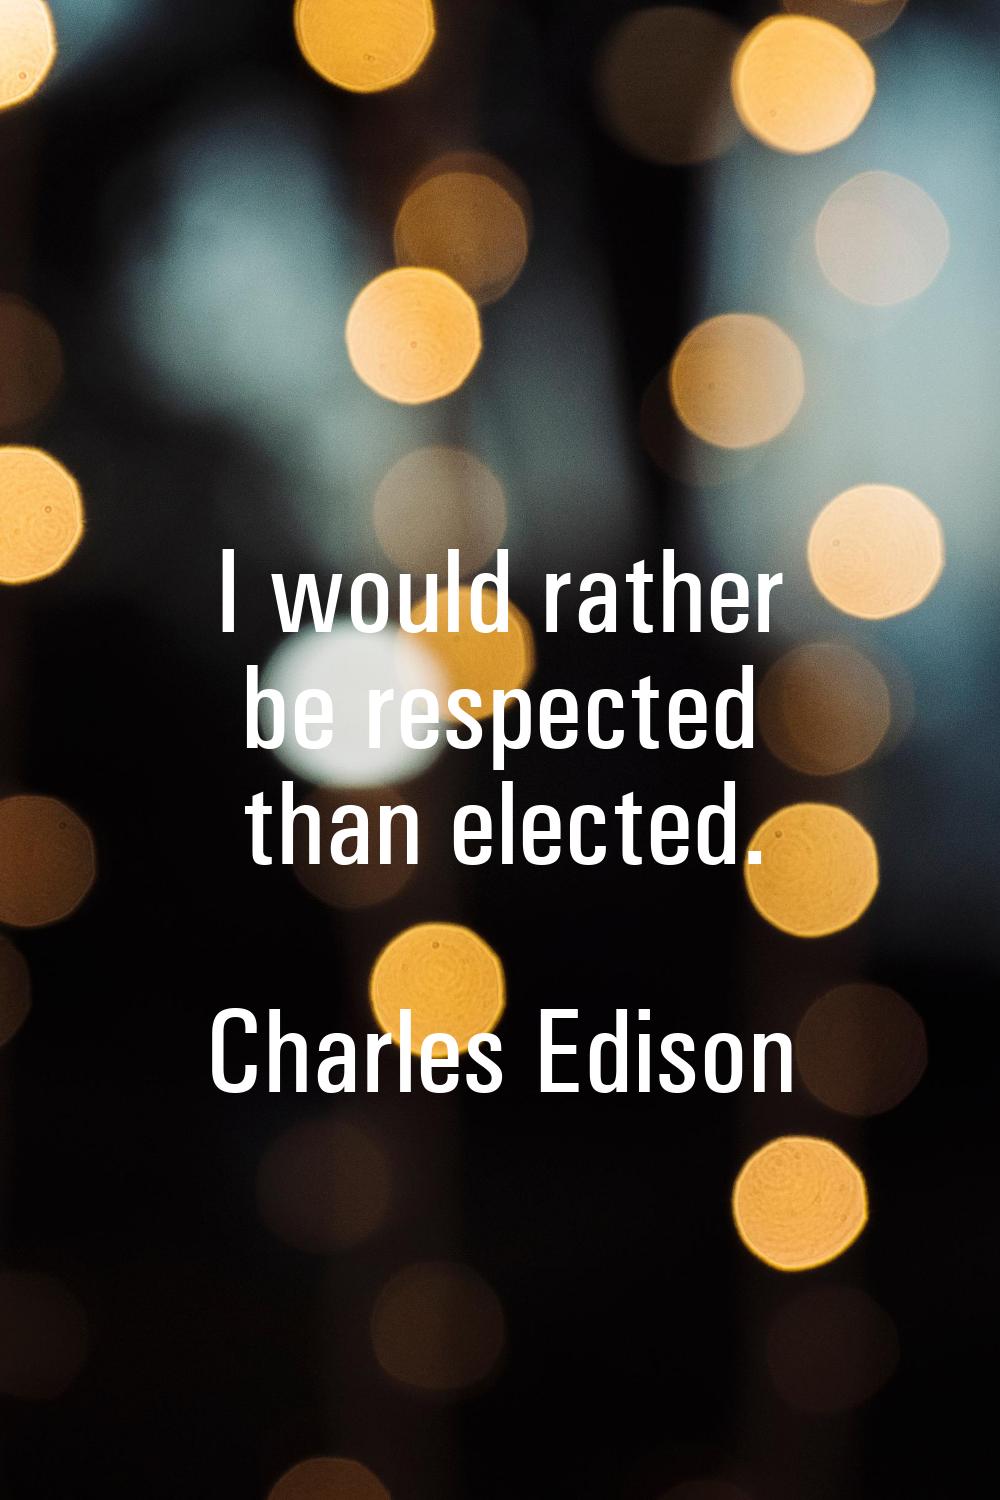 I would rather be respected than elected.